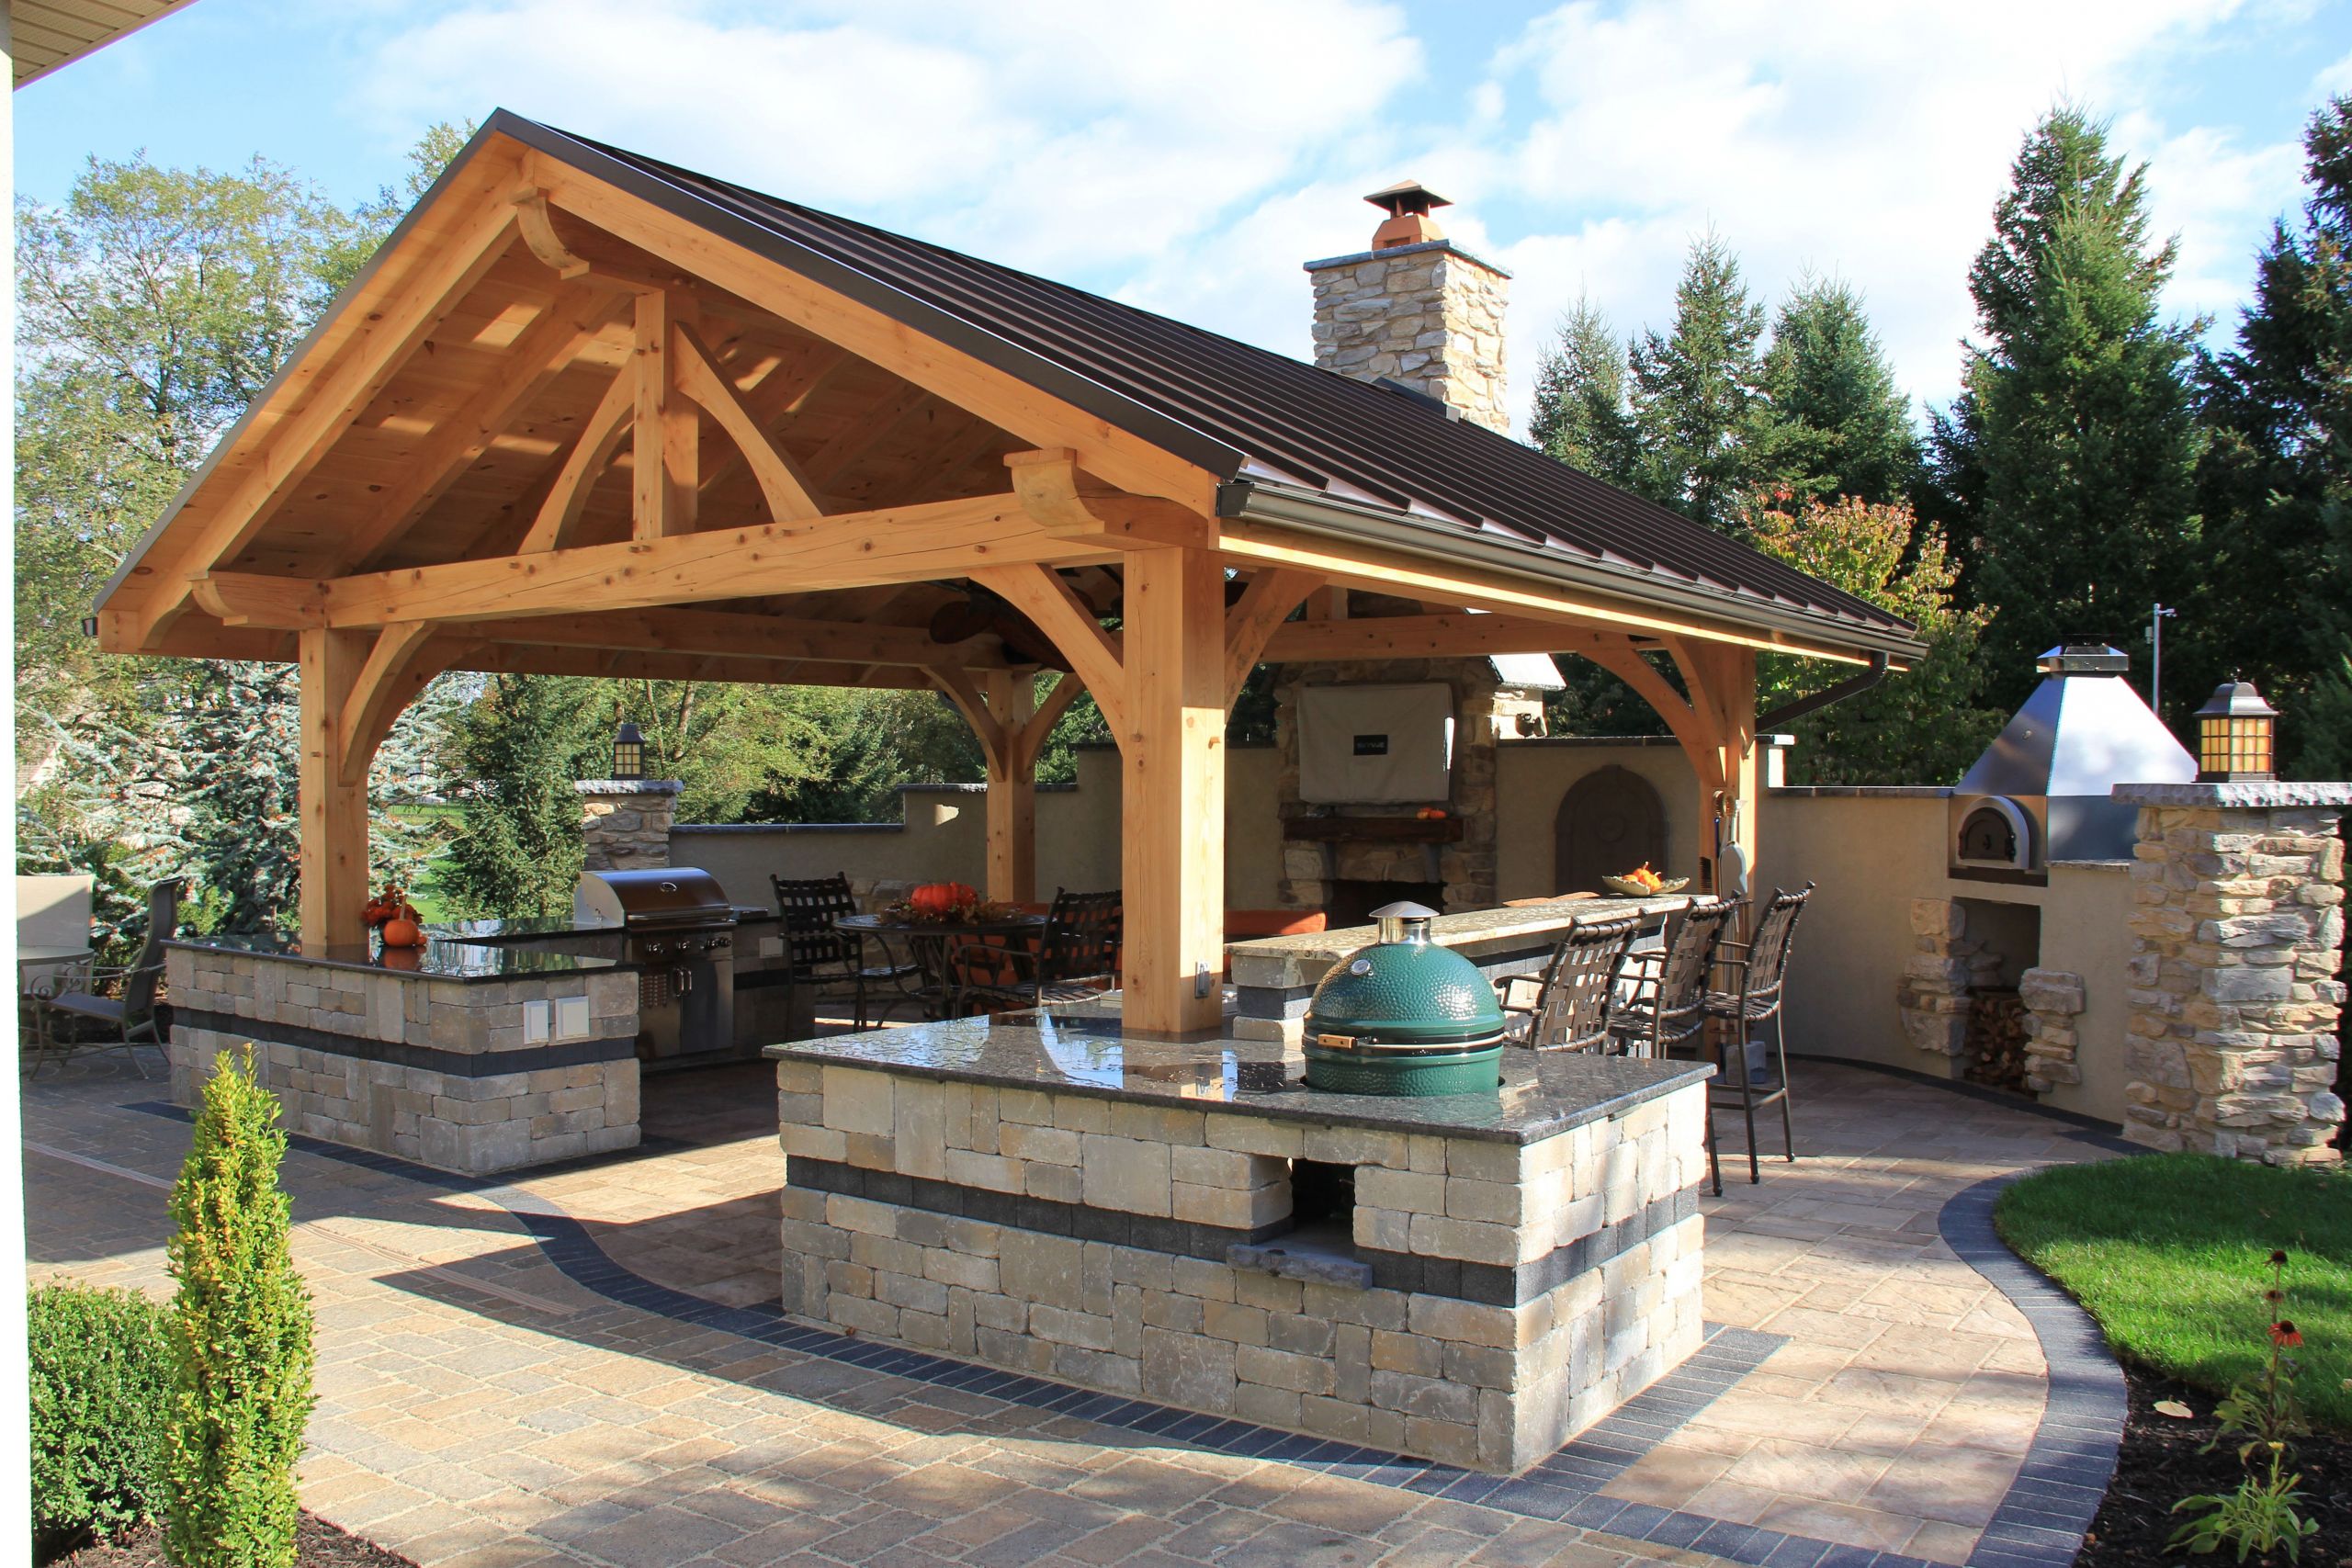 Covered Outdoor Kitchen Structures
 Entertaining space plete with an outdoor kitchen